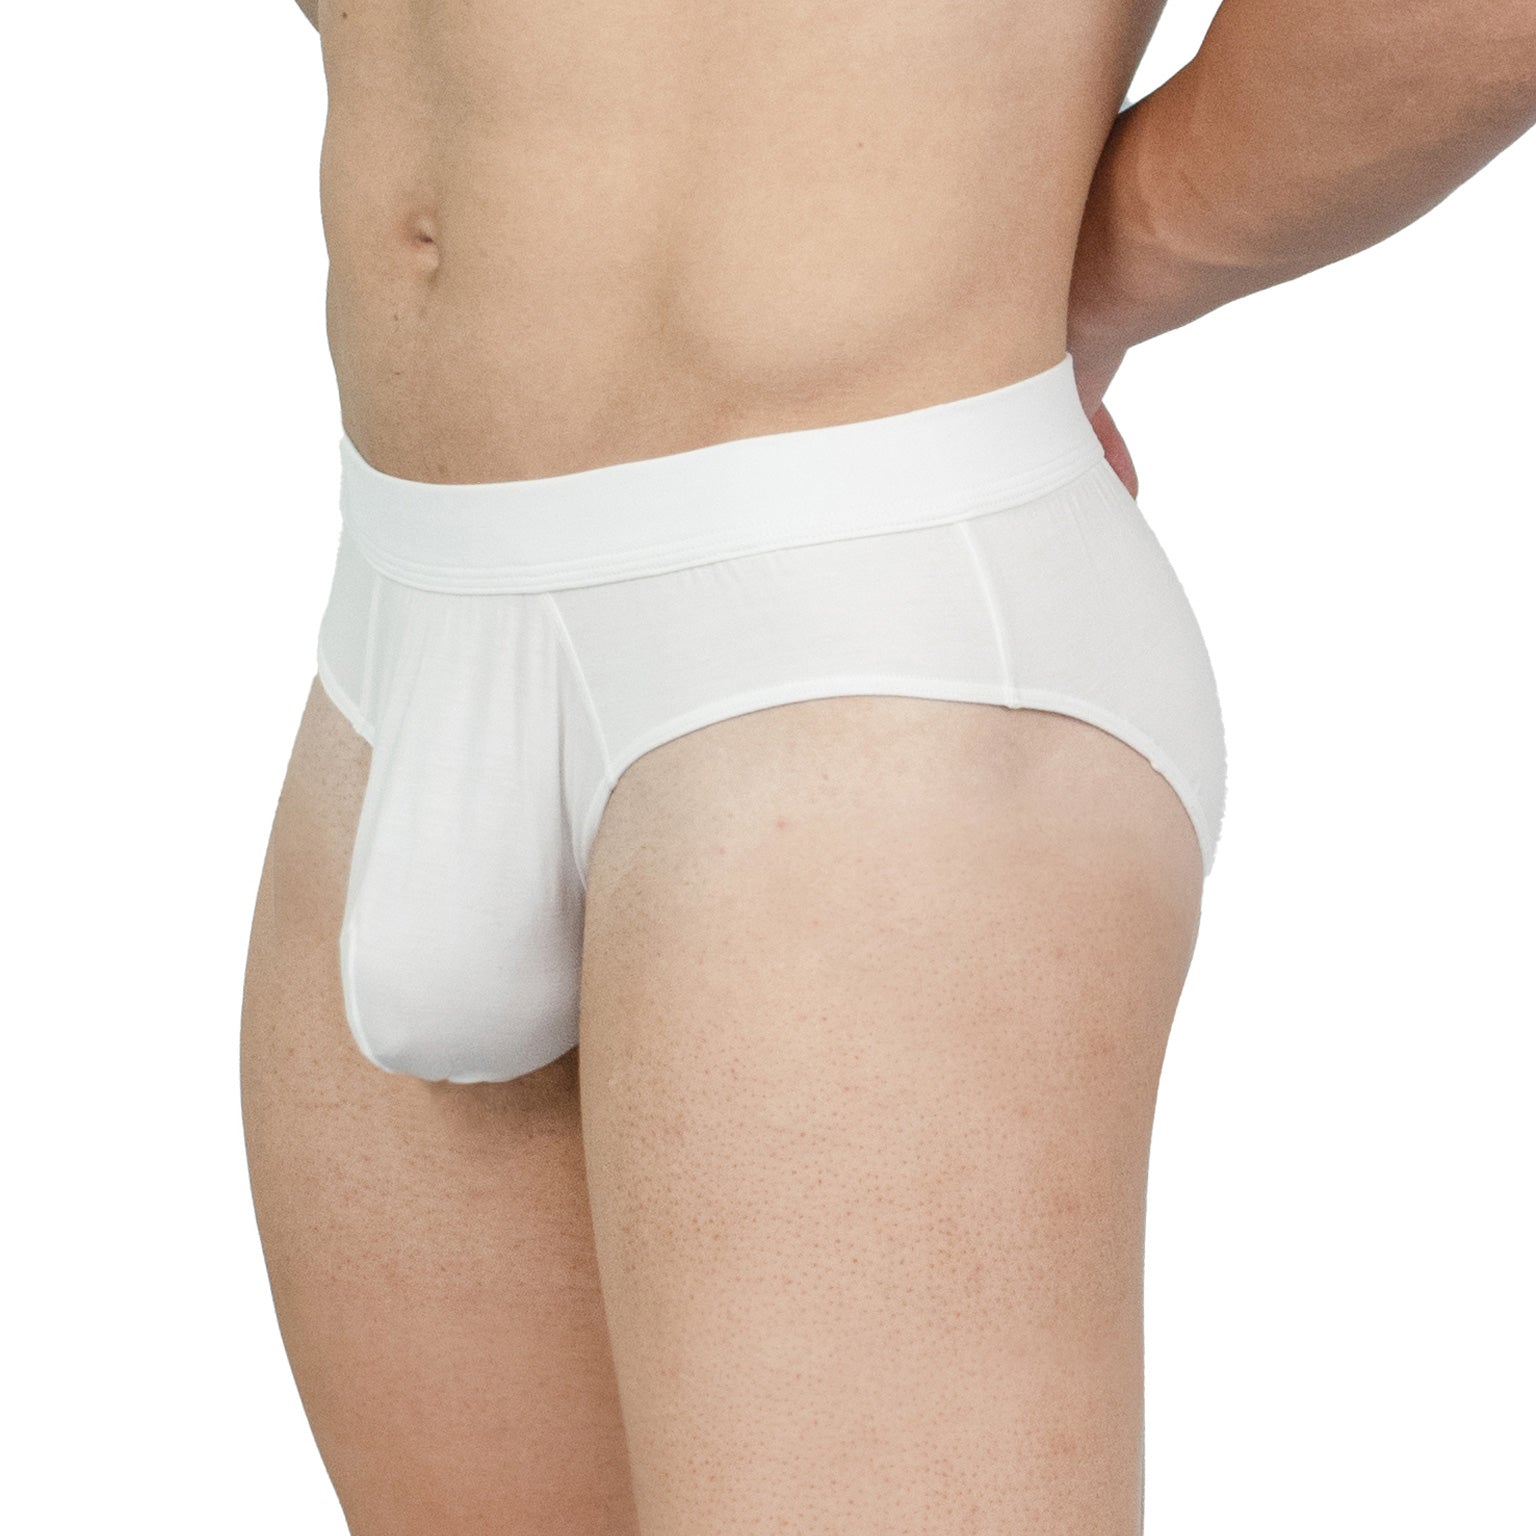 Neude., a luxury shapewear underwear line for men, launched at The